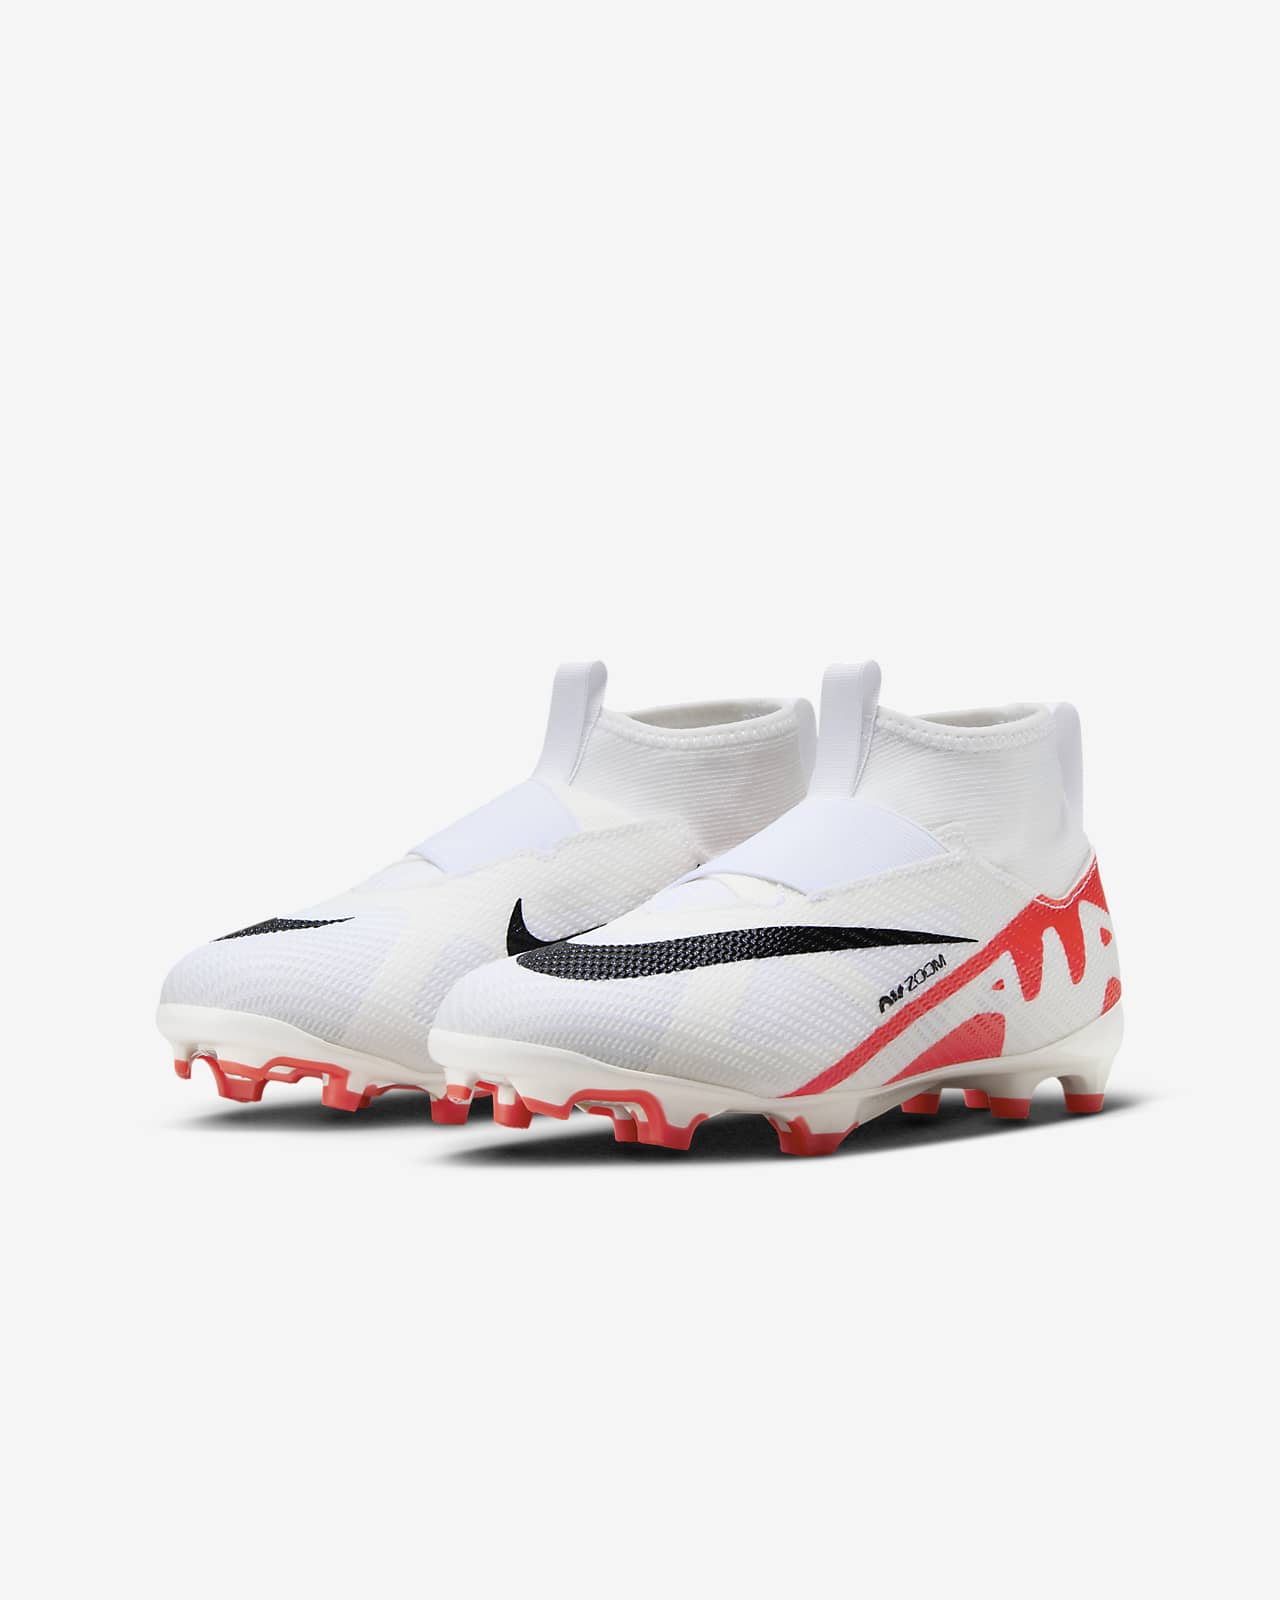 correcto Cortés travesura Nike Jr. Mercurial Superfly 9 Pro Younger/Older Kids' Firm-Ground Football  Boot. Nike LU